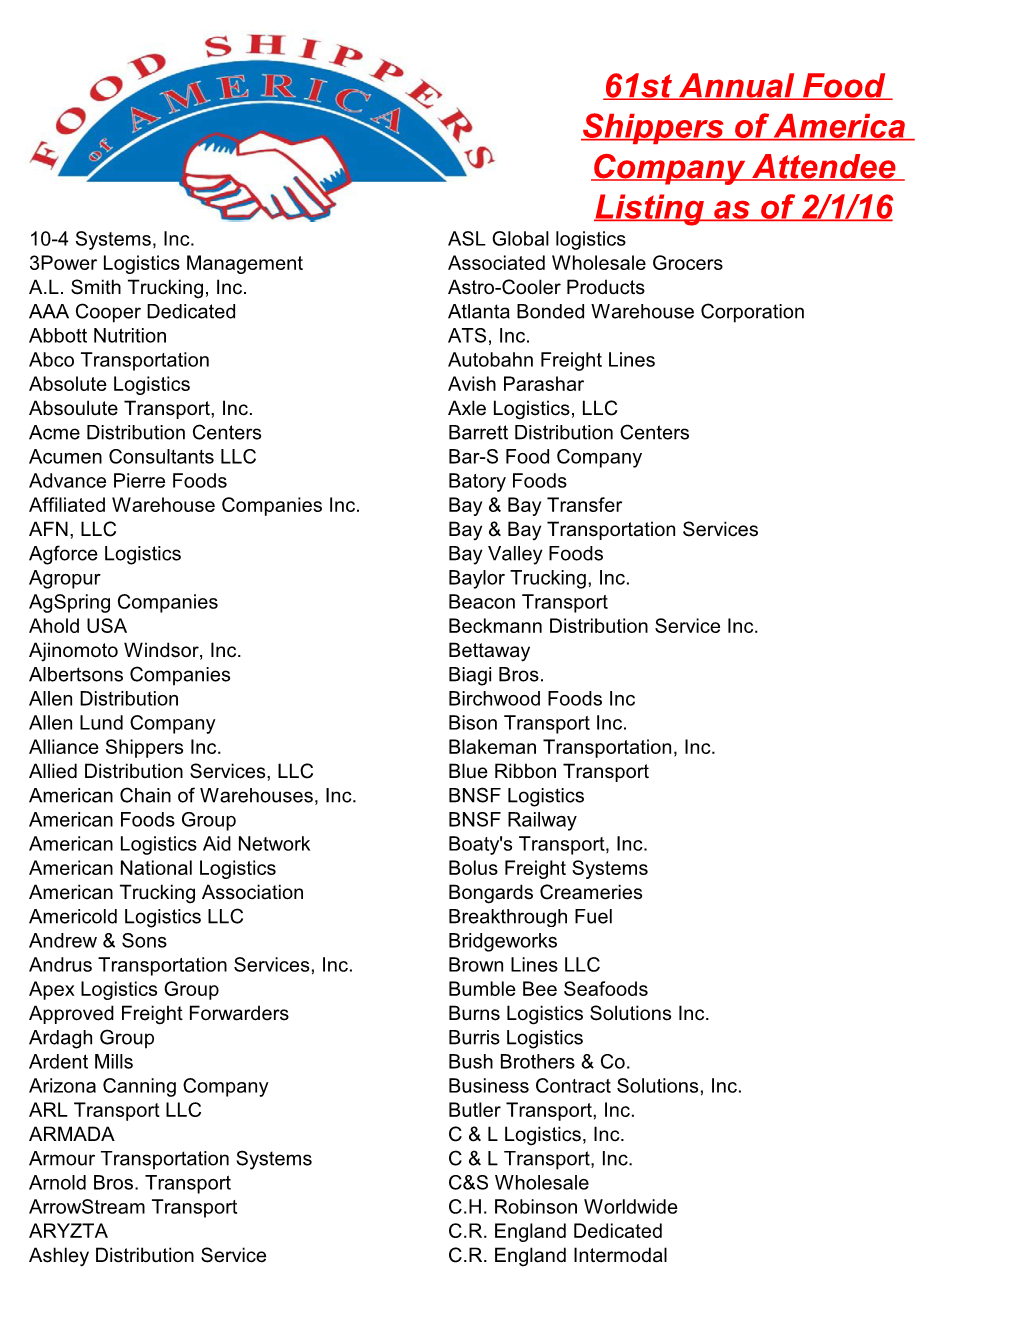 61St Annual Food Shippers of America Company Attendee Listing As of 2/1/16 10-4 Systems, Inc